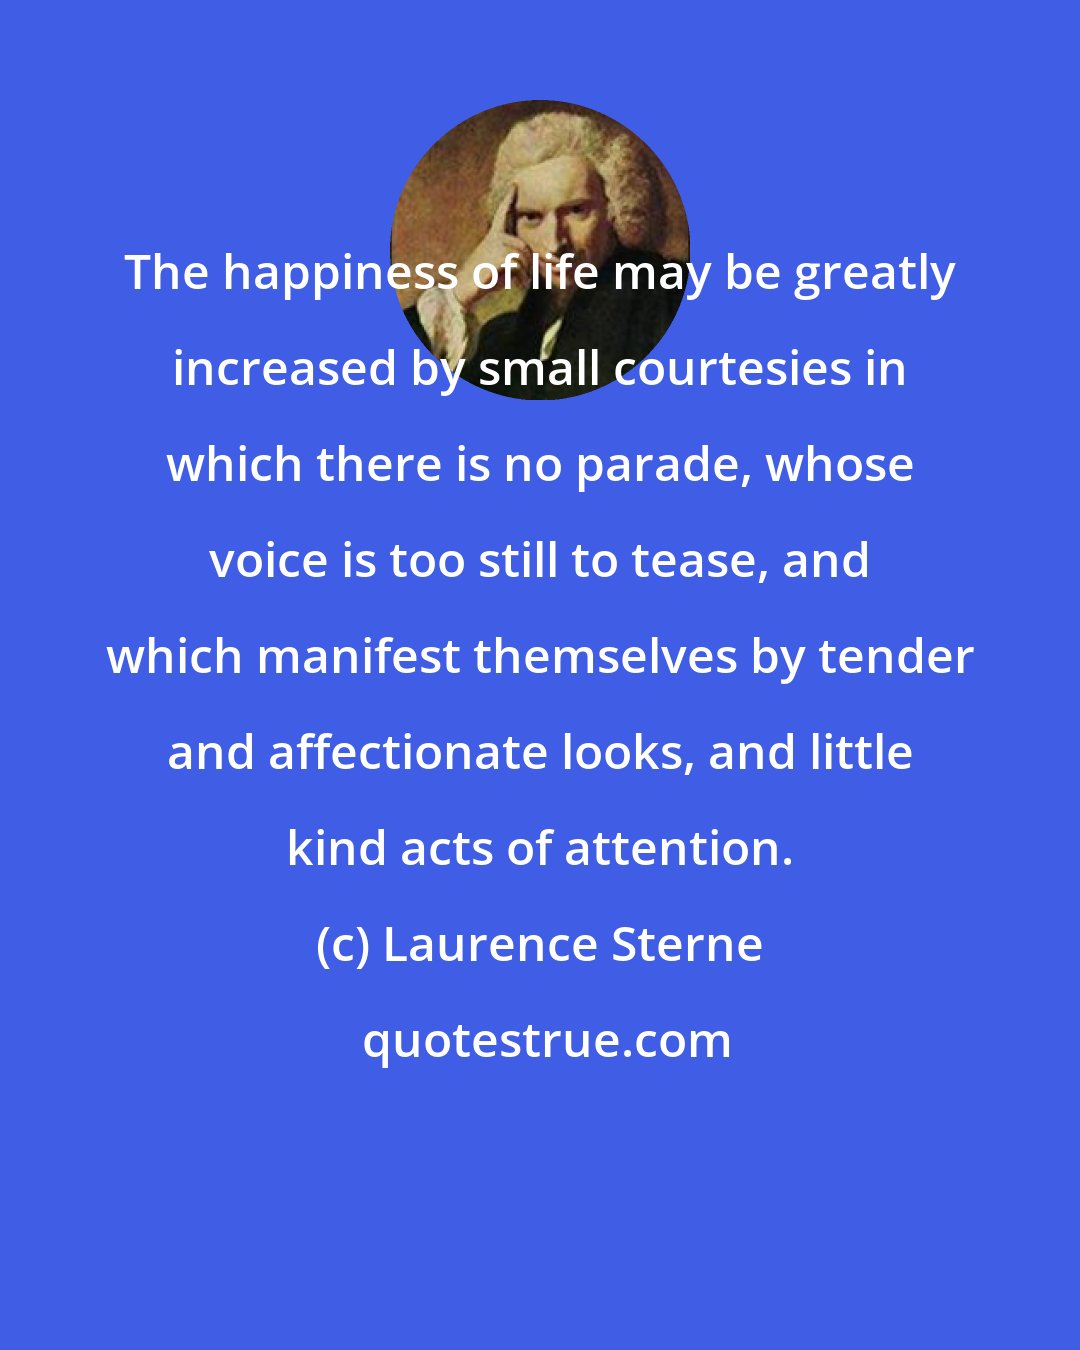 Laurence Sterne: The happiness of life may be greatly increased by small courtesies in which there is no parade, whose voice is too still to tease, and which manifest themselves by tender and affectionate looks, and little kind acts of attention.